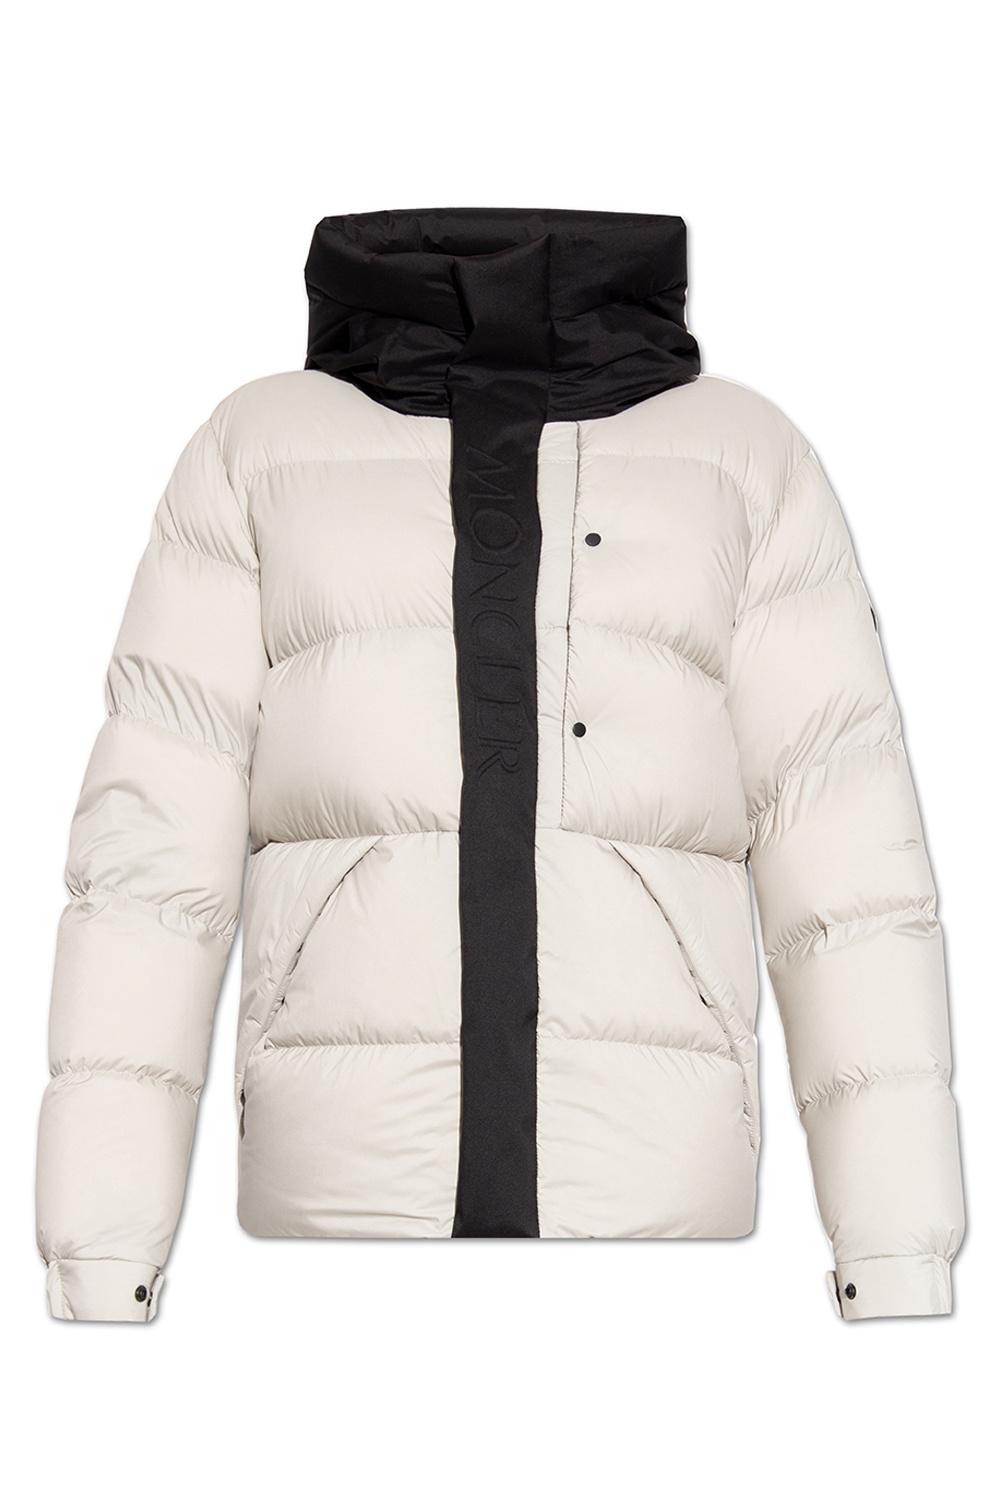 Moncler 'madeira' Down Jacket in Grey for Men | Lyst Canada